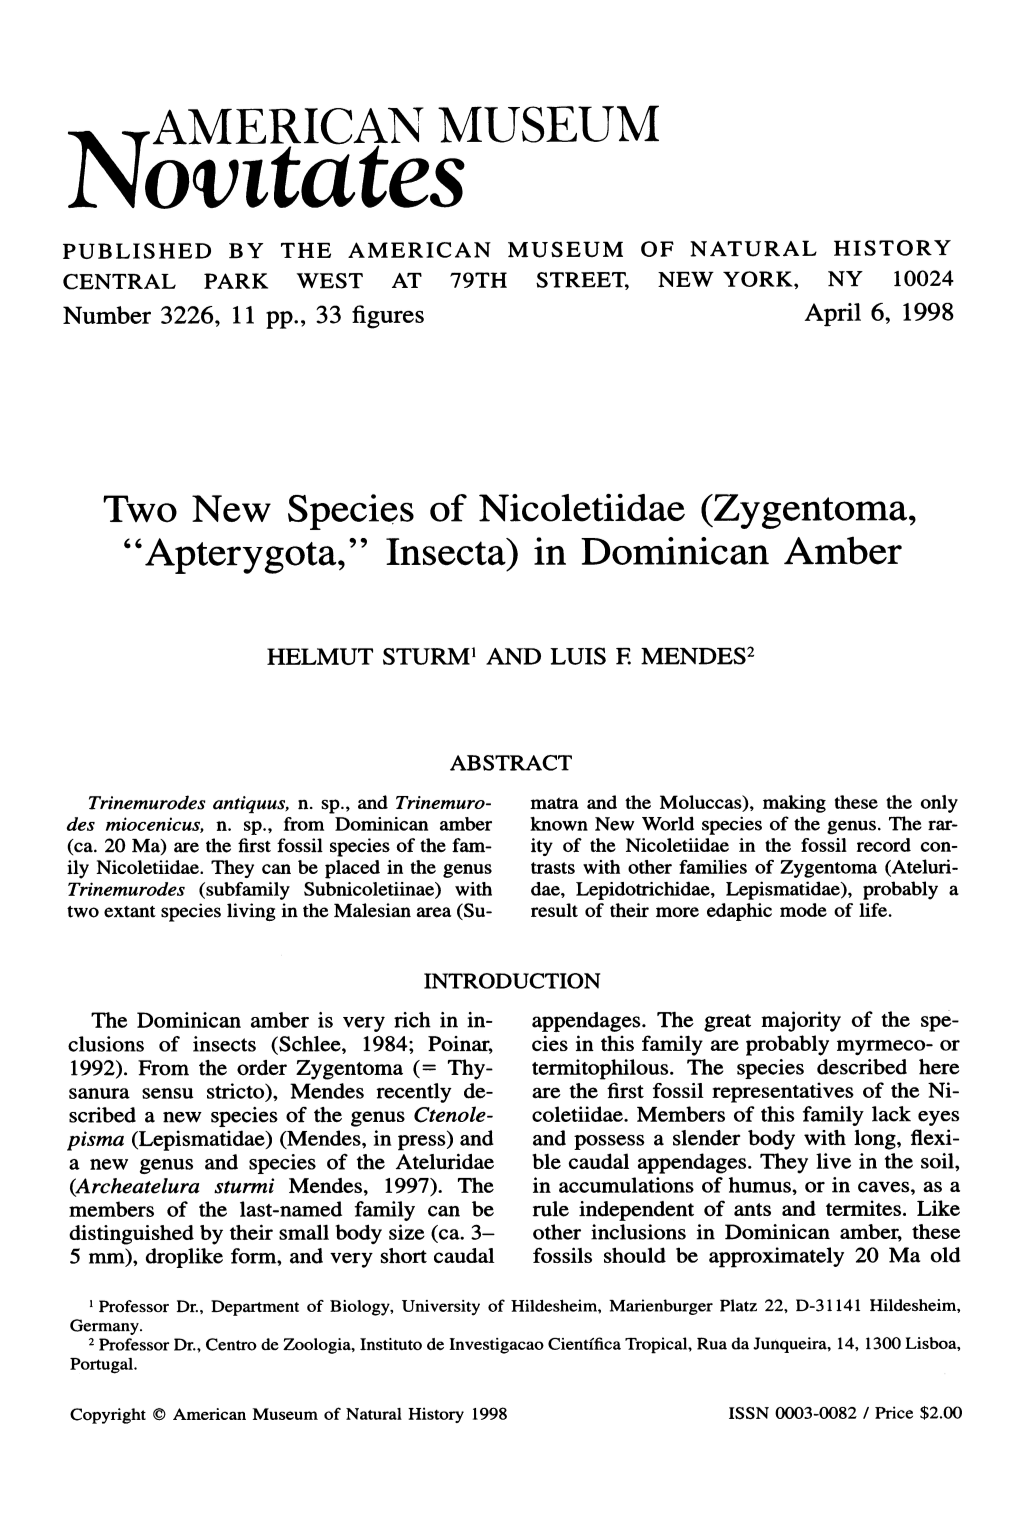 Novttates PUBLISHED by the AMERICAN MUSEUM of NATURAL HISTORY CENTRAL PARK WEST at 79TH STREET, NEW YORK, NY 10024 Number 3226, 11 Pp., 33 Figures April 6, 1998